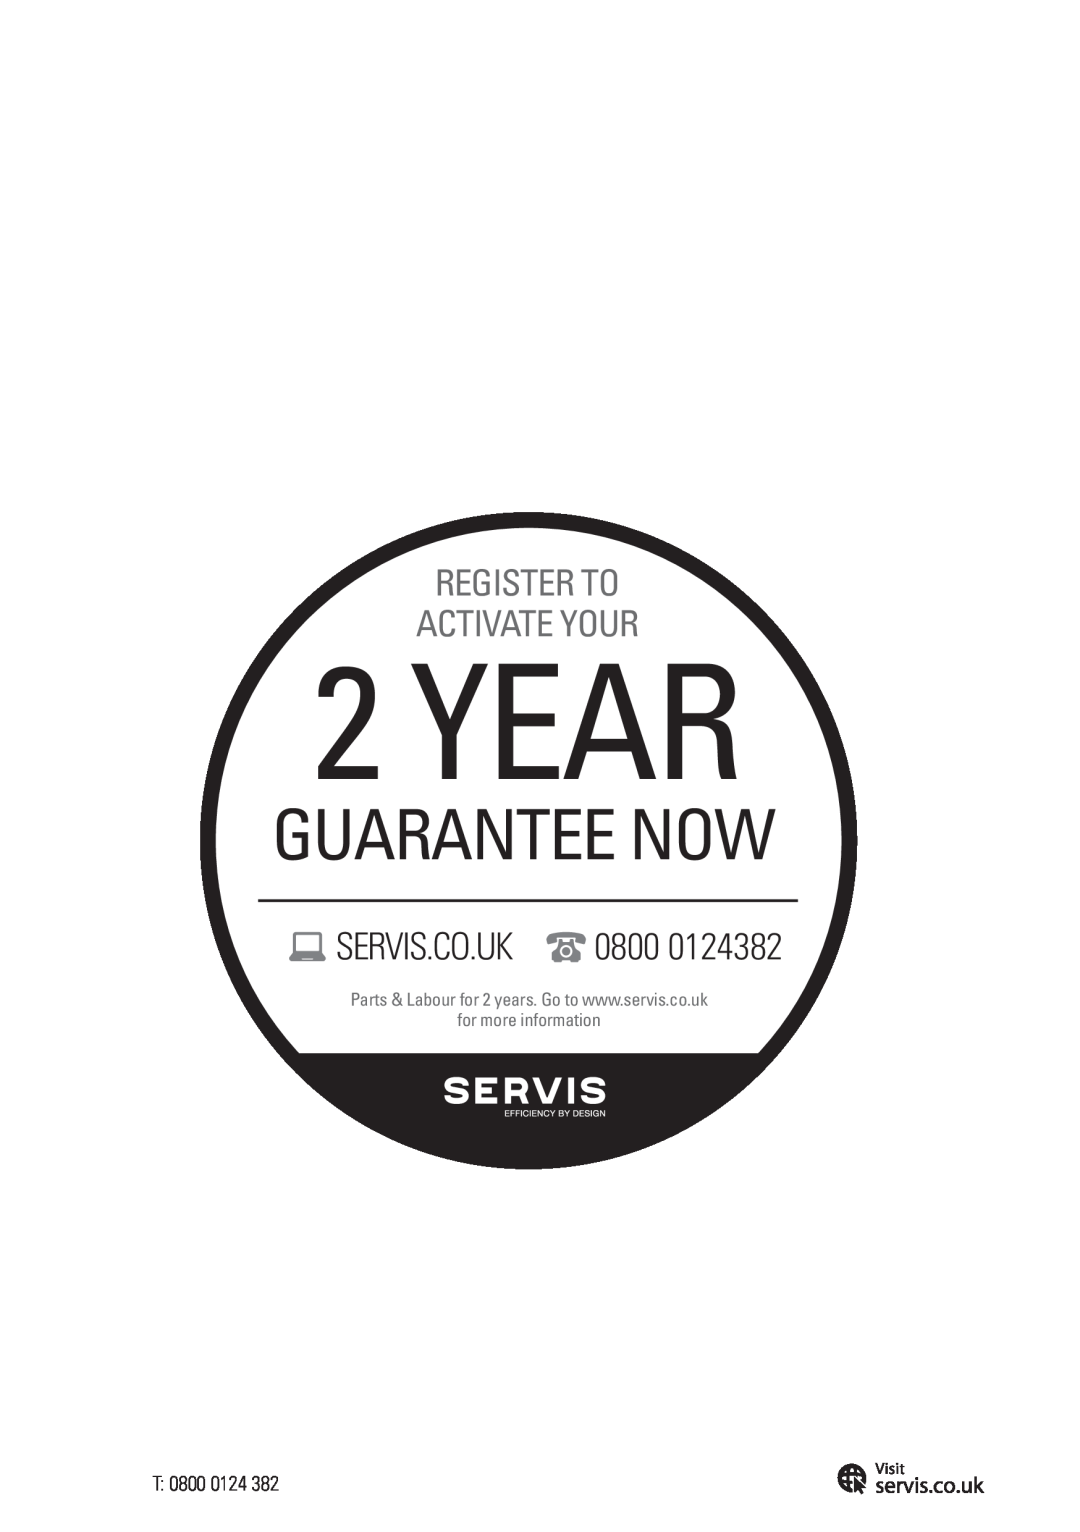 Servis FD91185SS user manual Year, Guarantee Now, Register To Activate Your, Servis.Co.Uk, for more information 